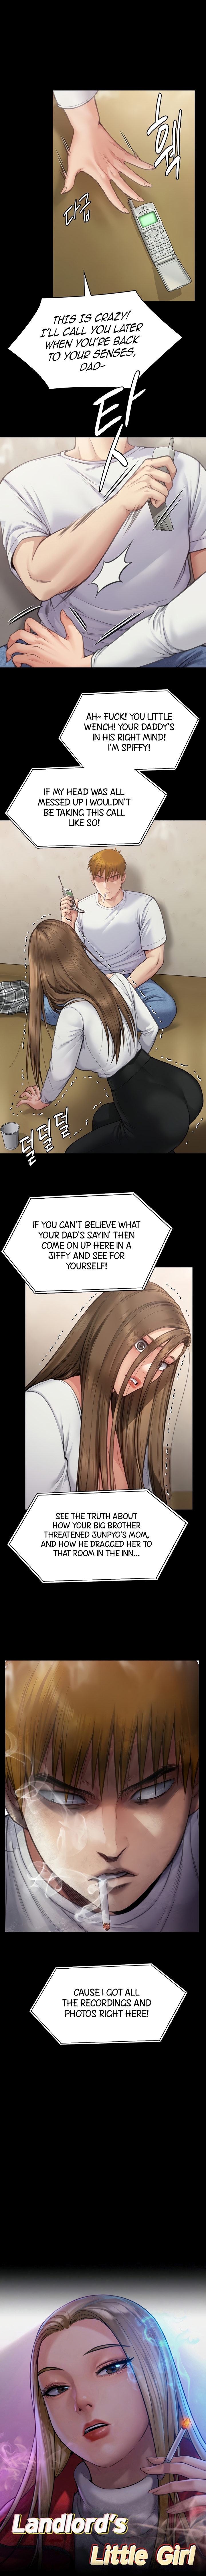 Panel Image 1 for chapter 281 of manhwa Queen Bee on read.oppai.stream